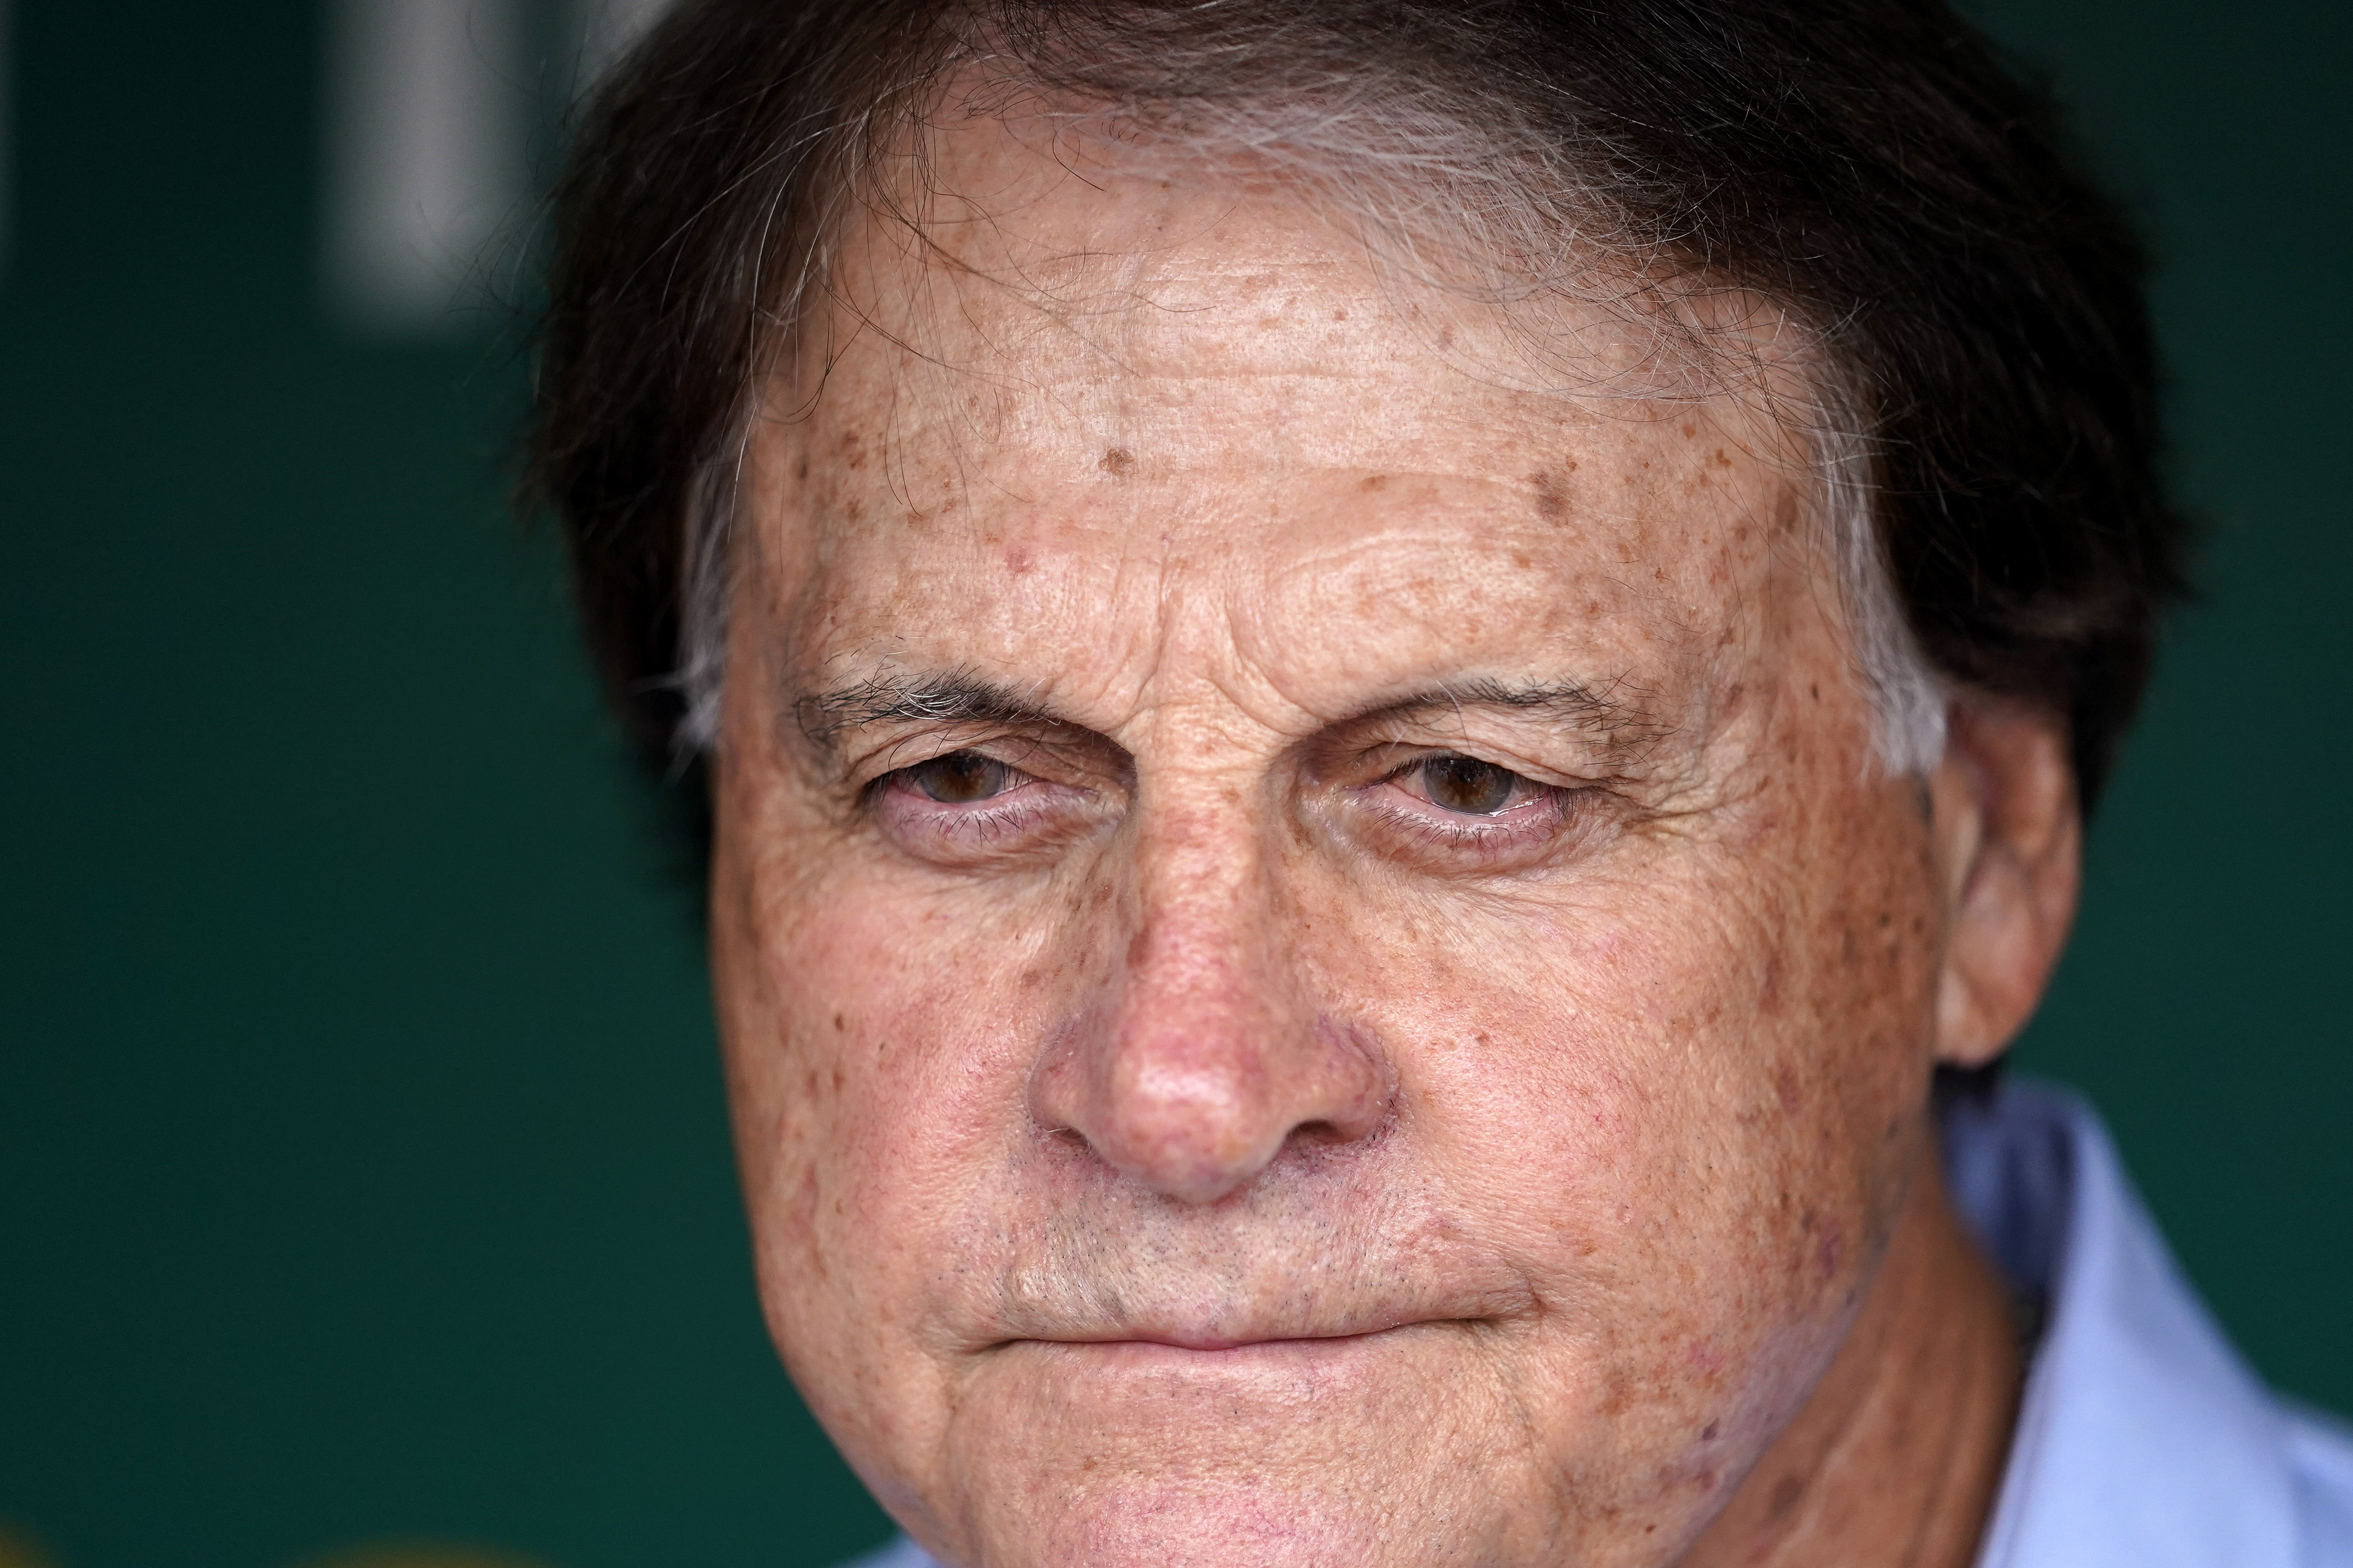 White Sox manager Tony La Russa out indefinitely with medical issue 